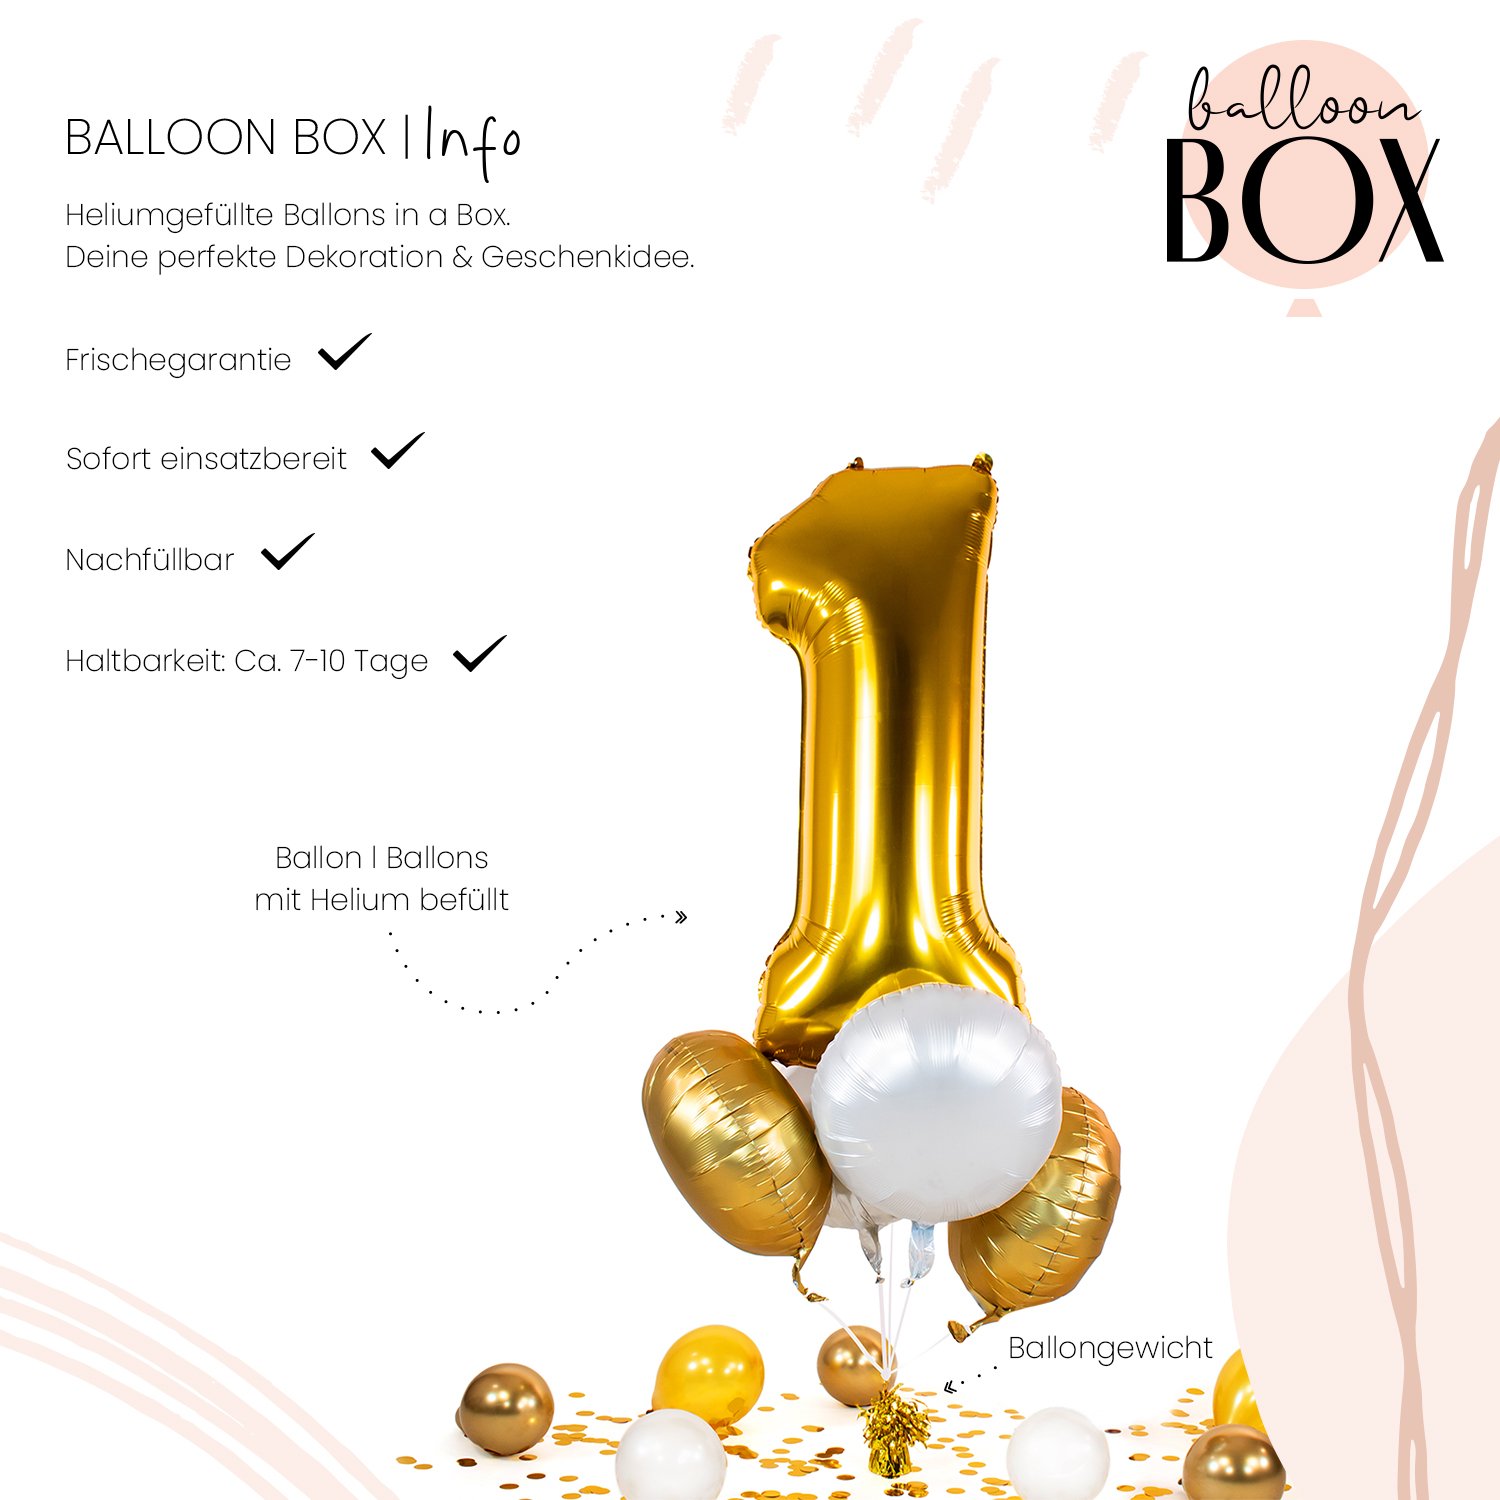 Heliumballon in a Box - Golden One